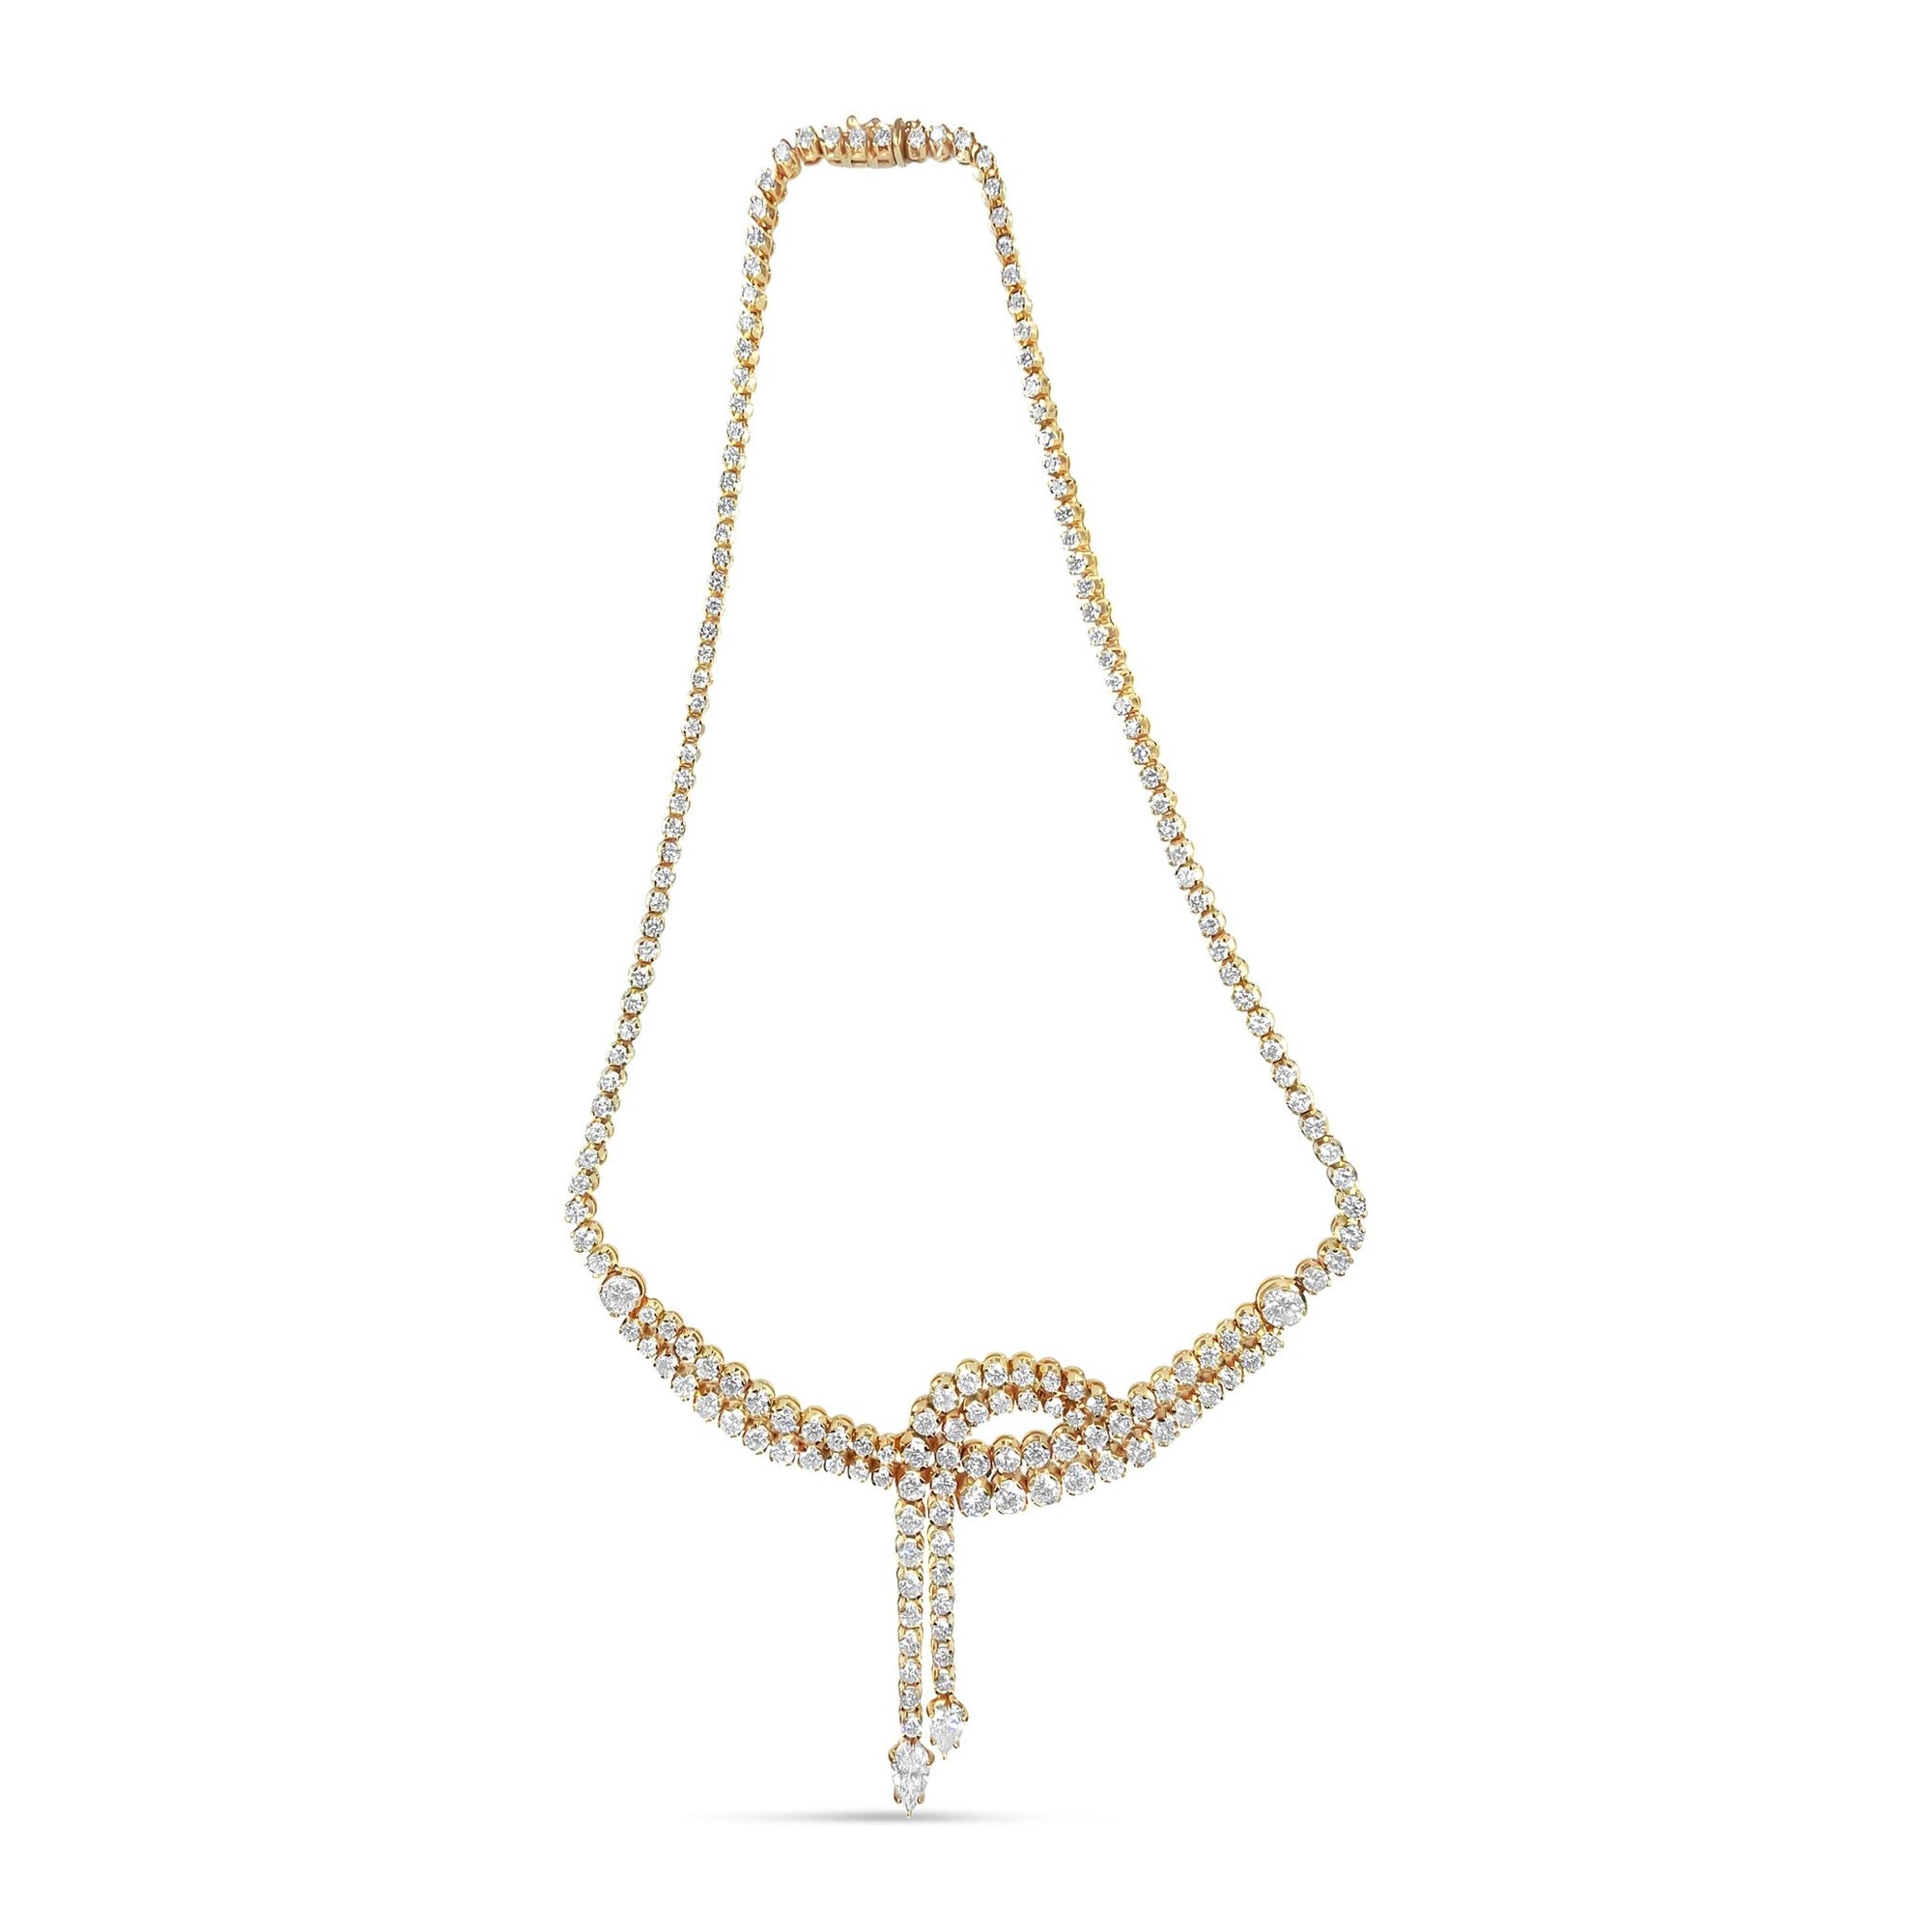 14k Yellow Gold 17.0 Cttw Diamond Double Row Lariat 18" Inch Tennis Necklace with Pear Shape Diamond Drop Tips (I-J Color, VS2-SI1 Clarity) - LinkagejewelrydesignLinkagejewelrydesign